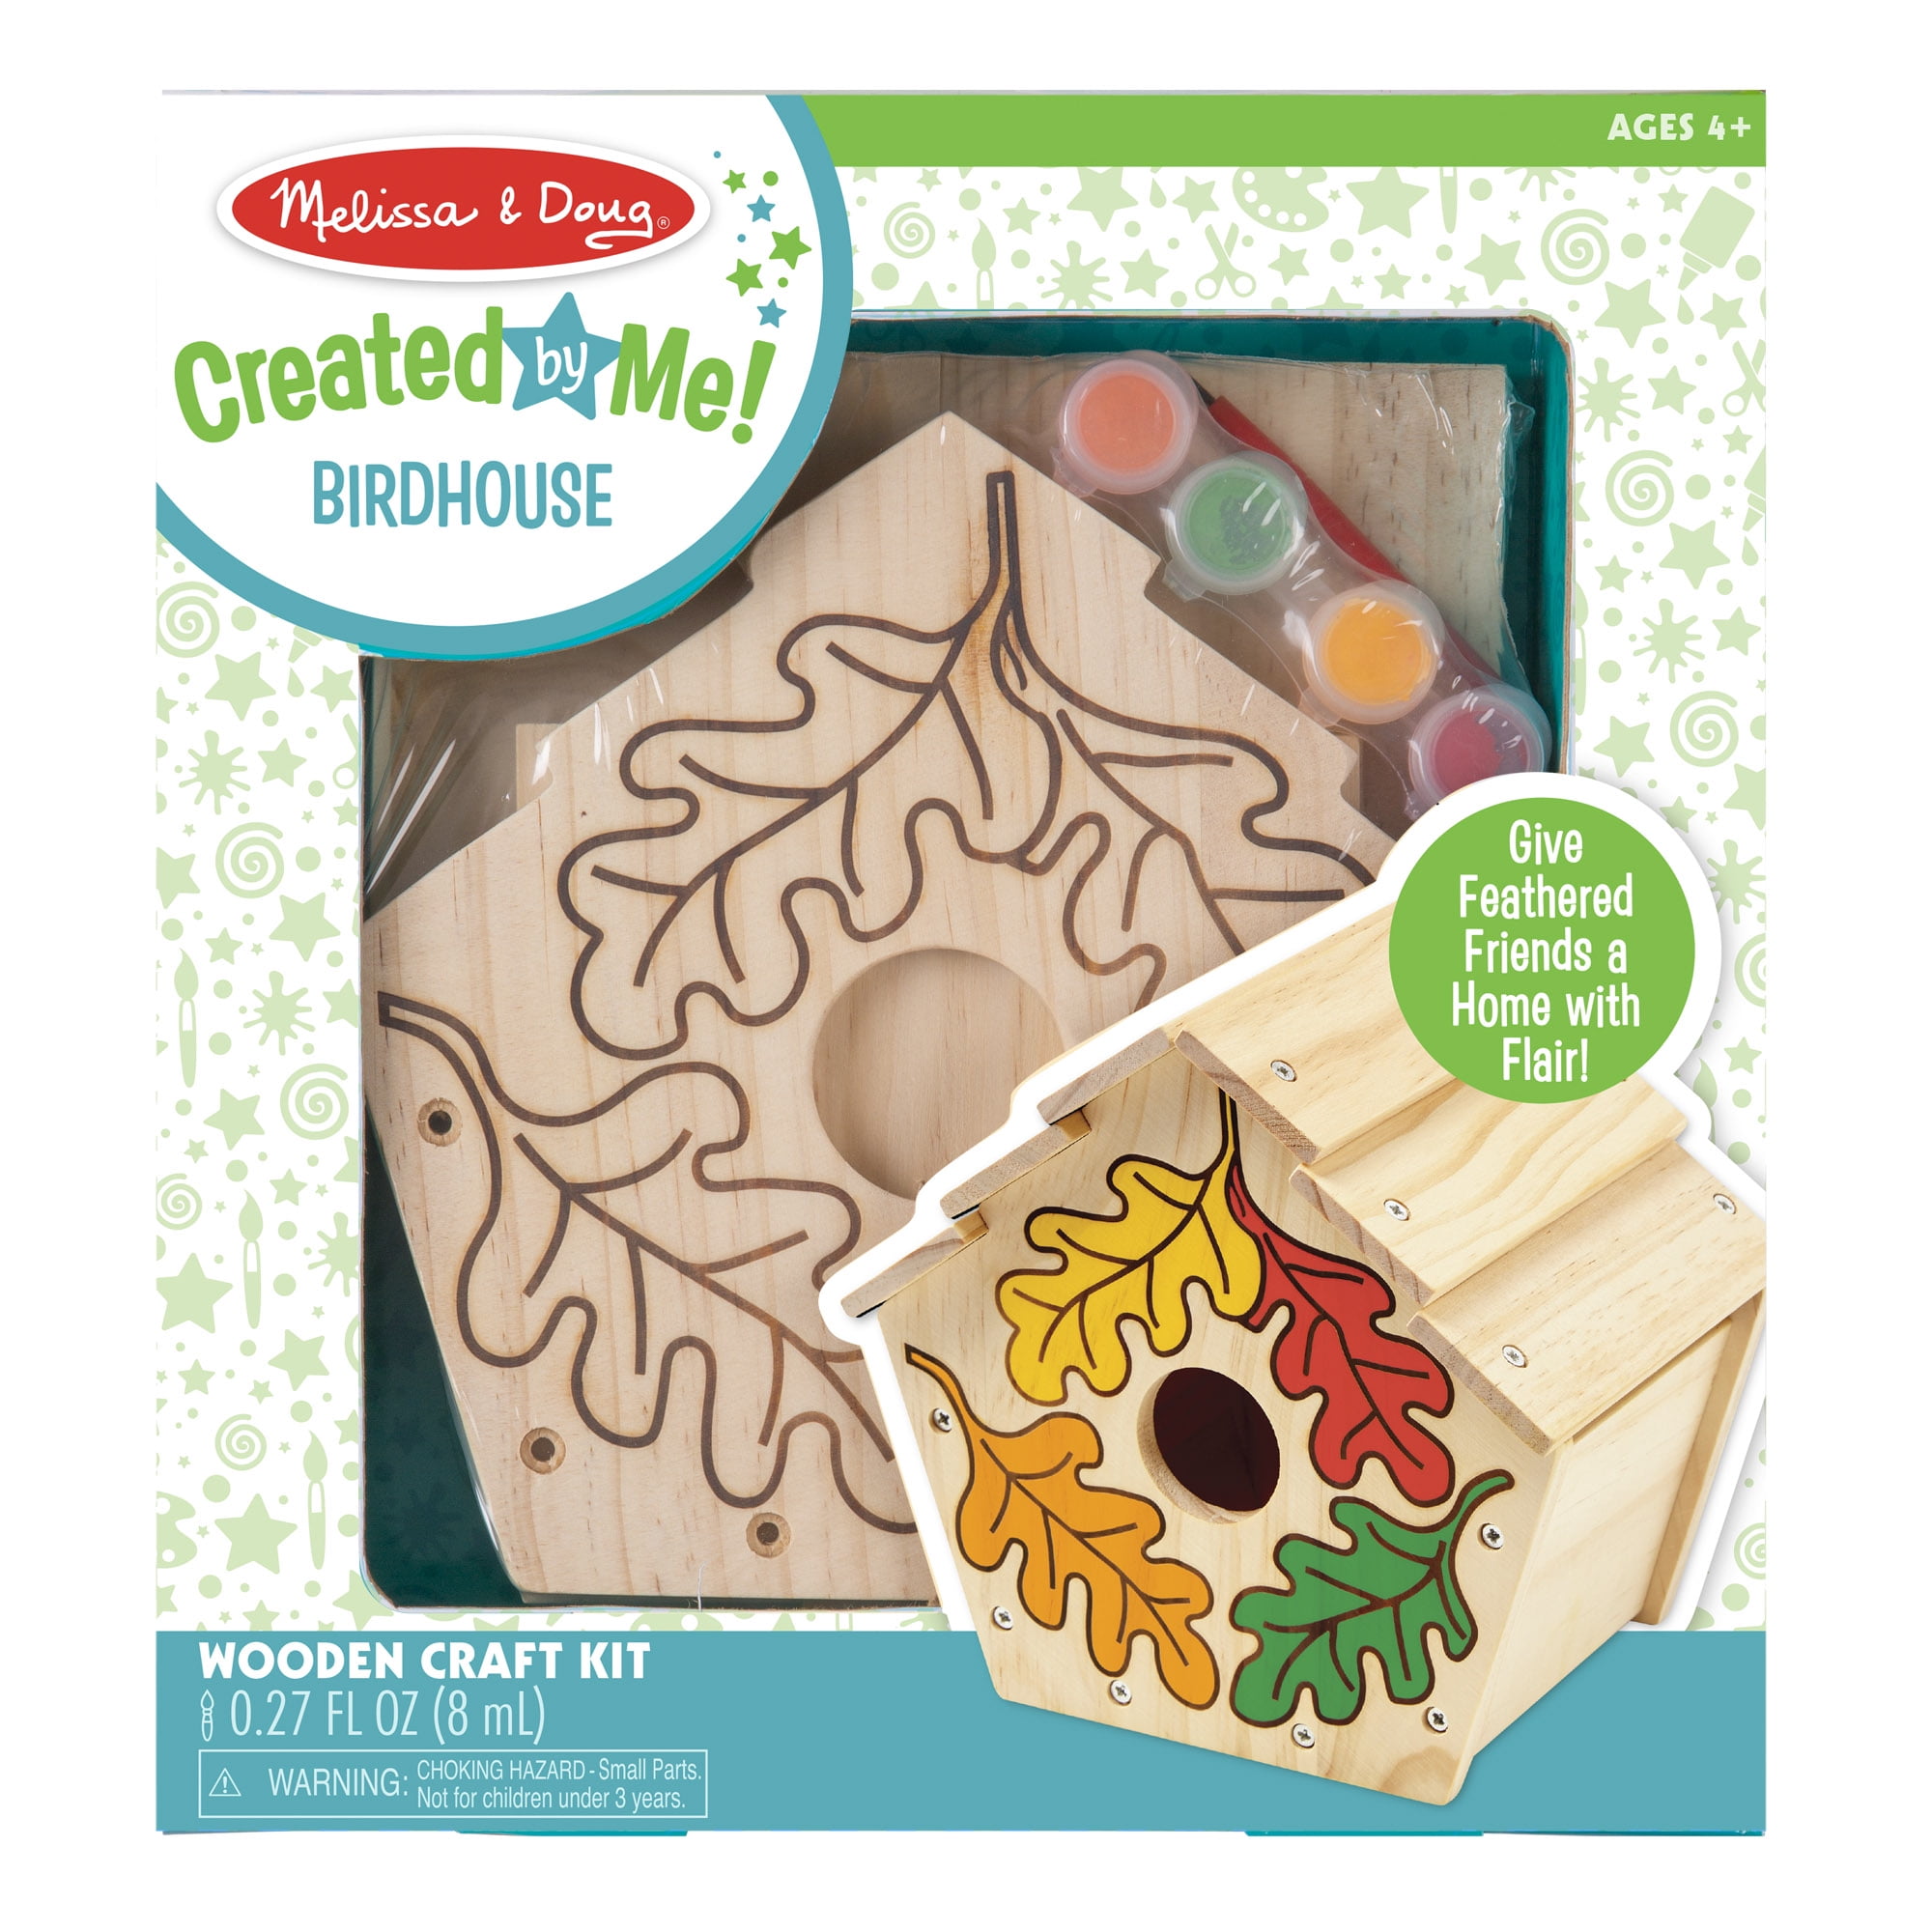 Melissa & Doug Decorate-Your-Own Wooden Pirate Chest Craft Kit